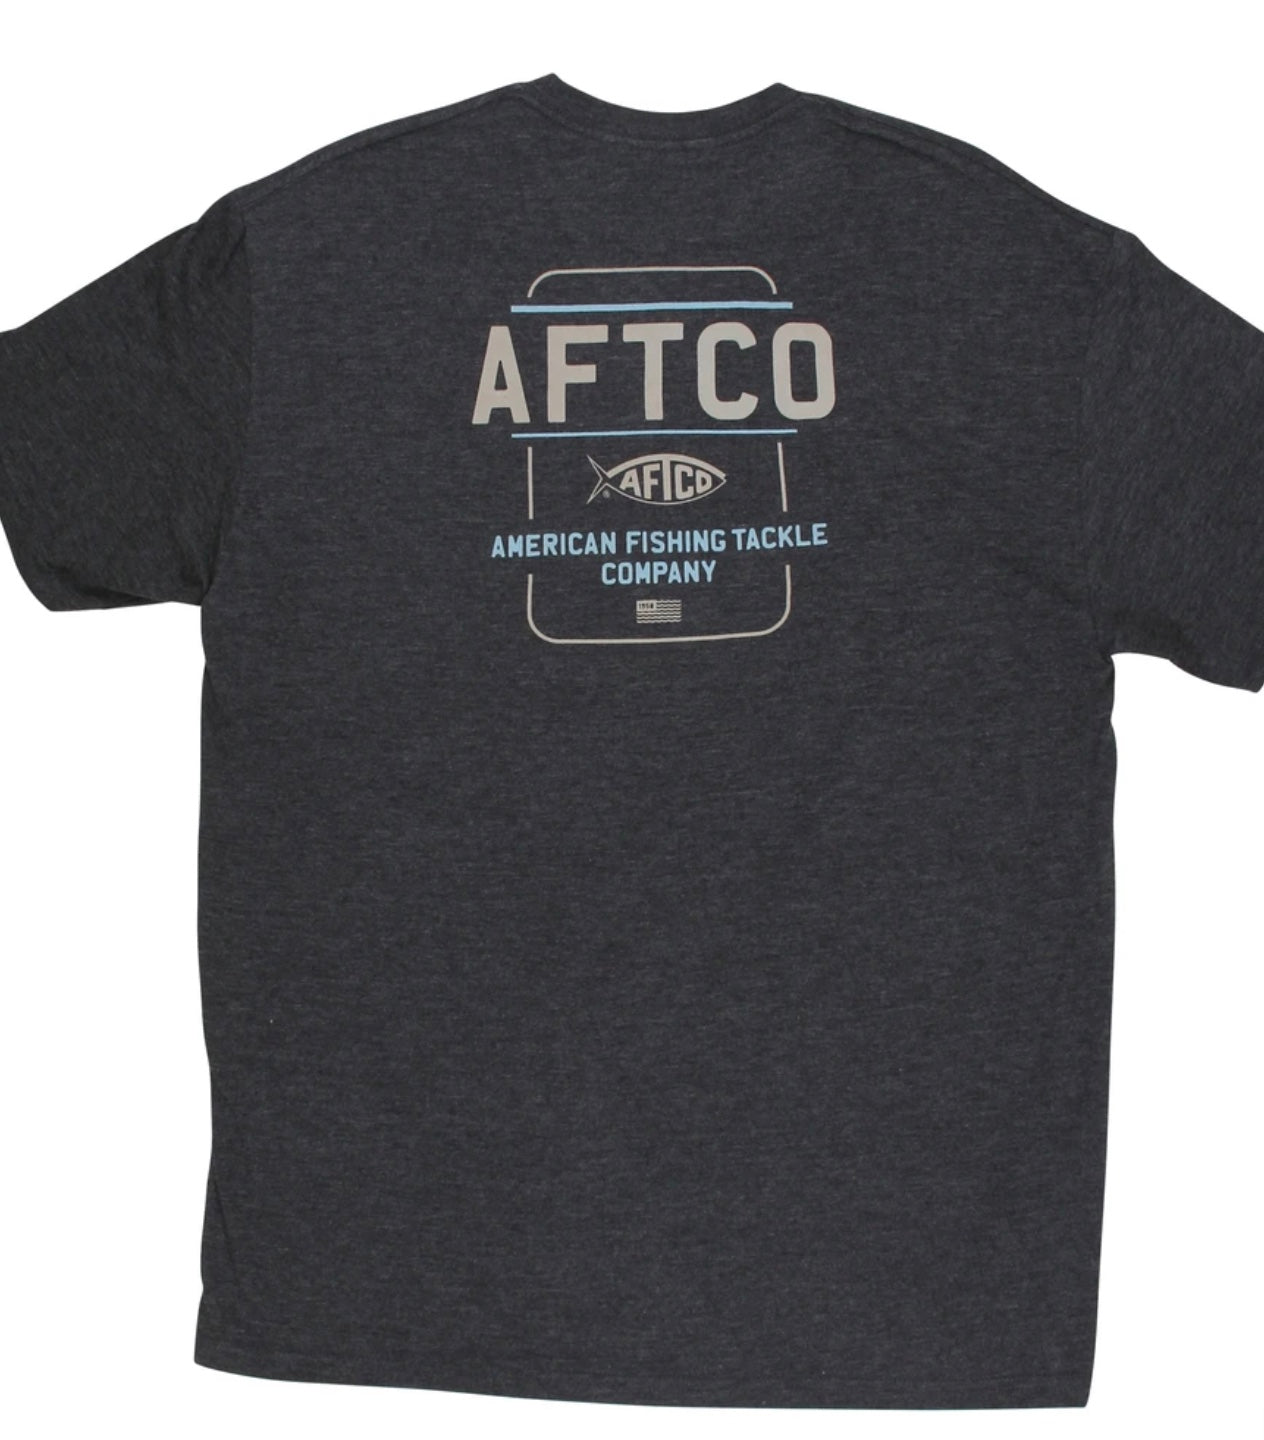 AFTCO T Shirt Men's Size XL Gray American Fishing Tackle Company 0060